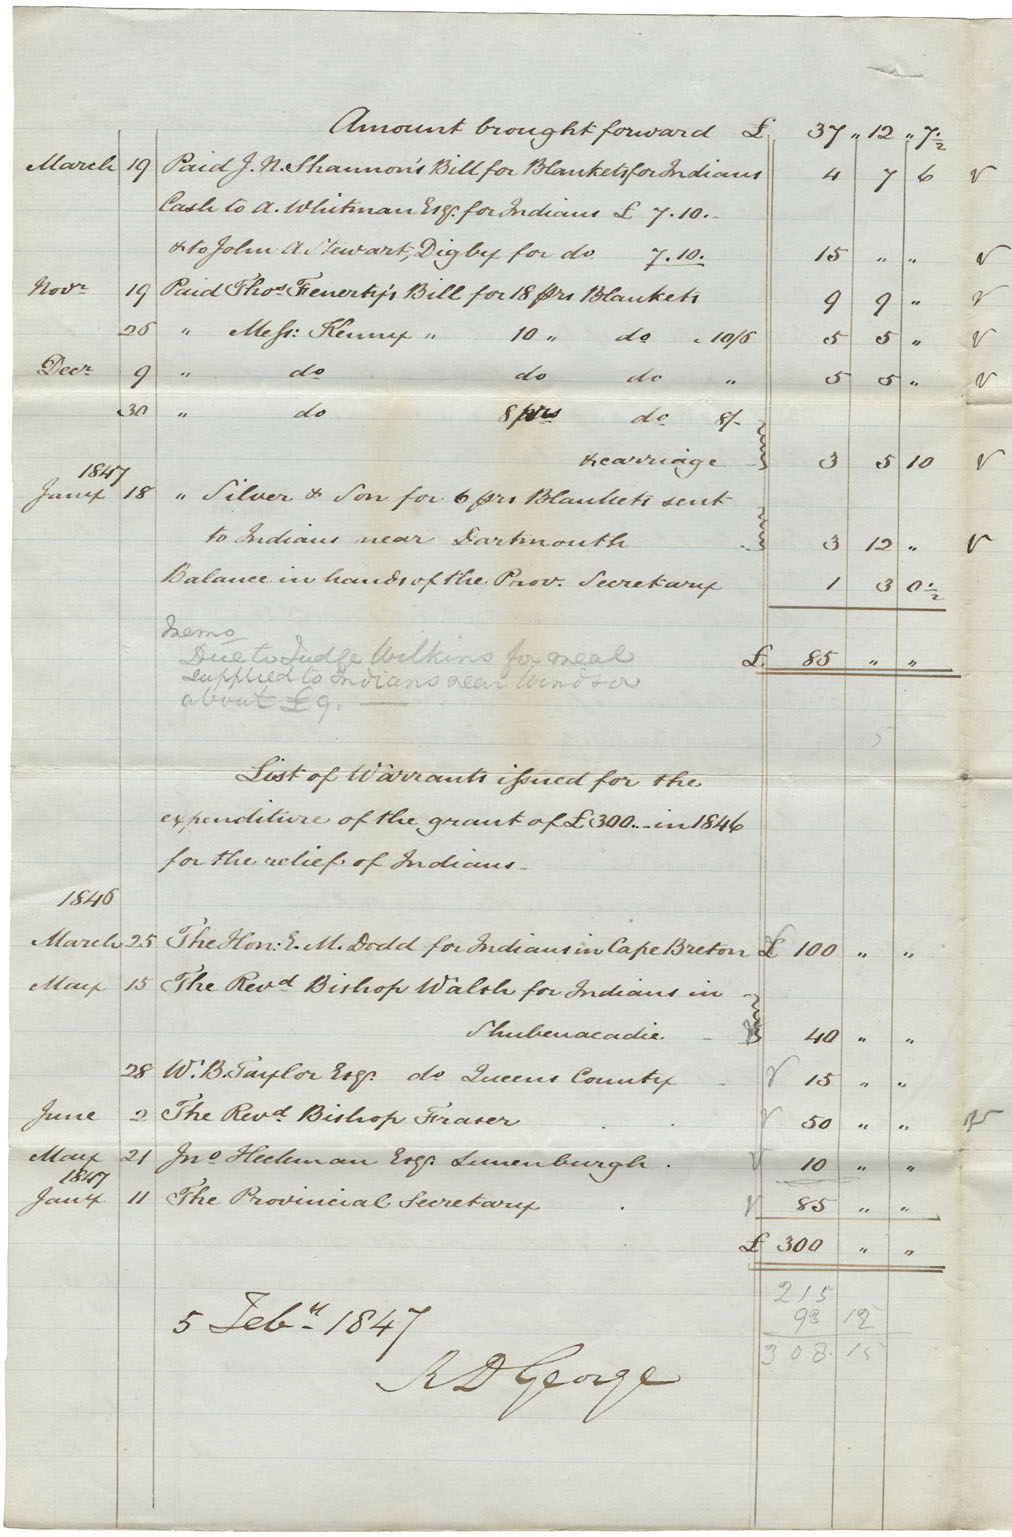 Receipts and bills of the Provincial Secretary for Indian relief with his report on expenditures for 1846.